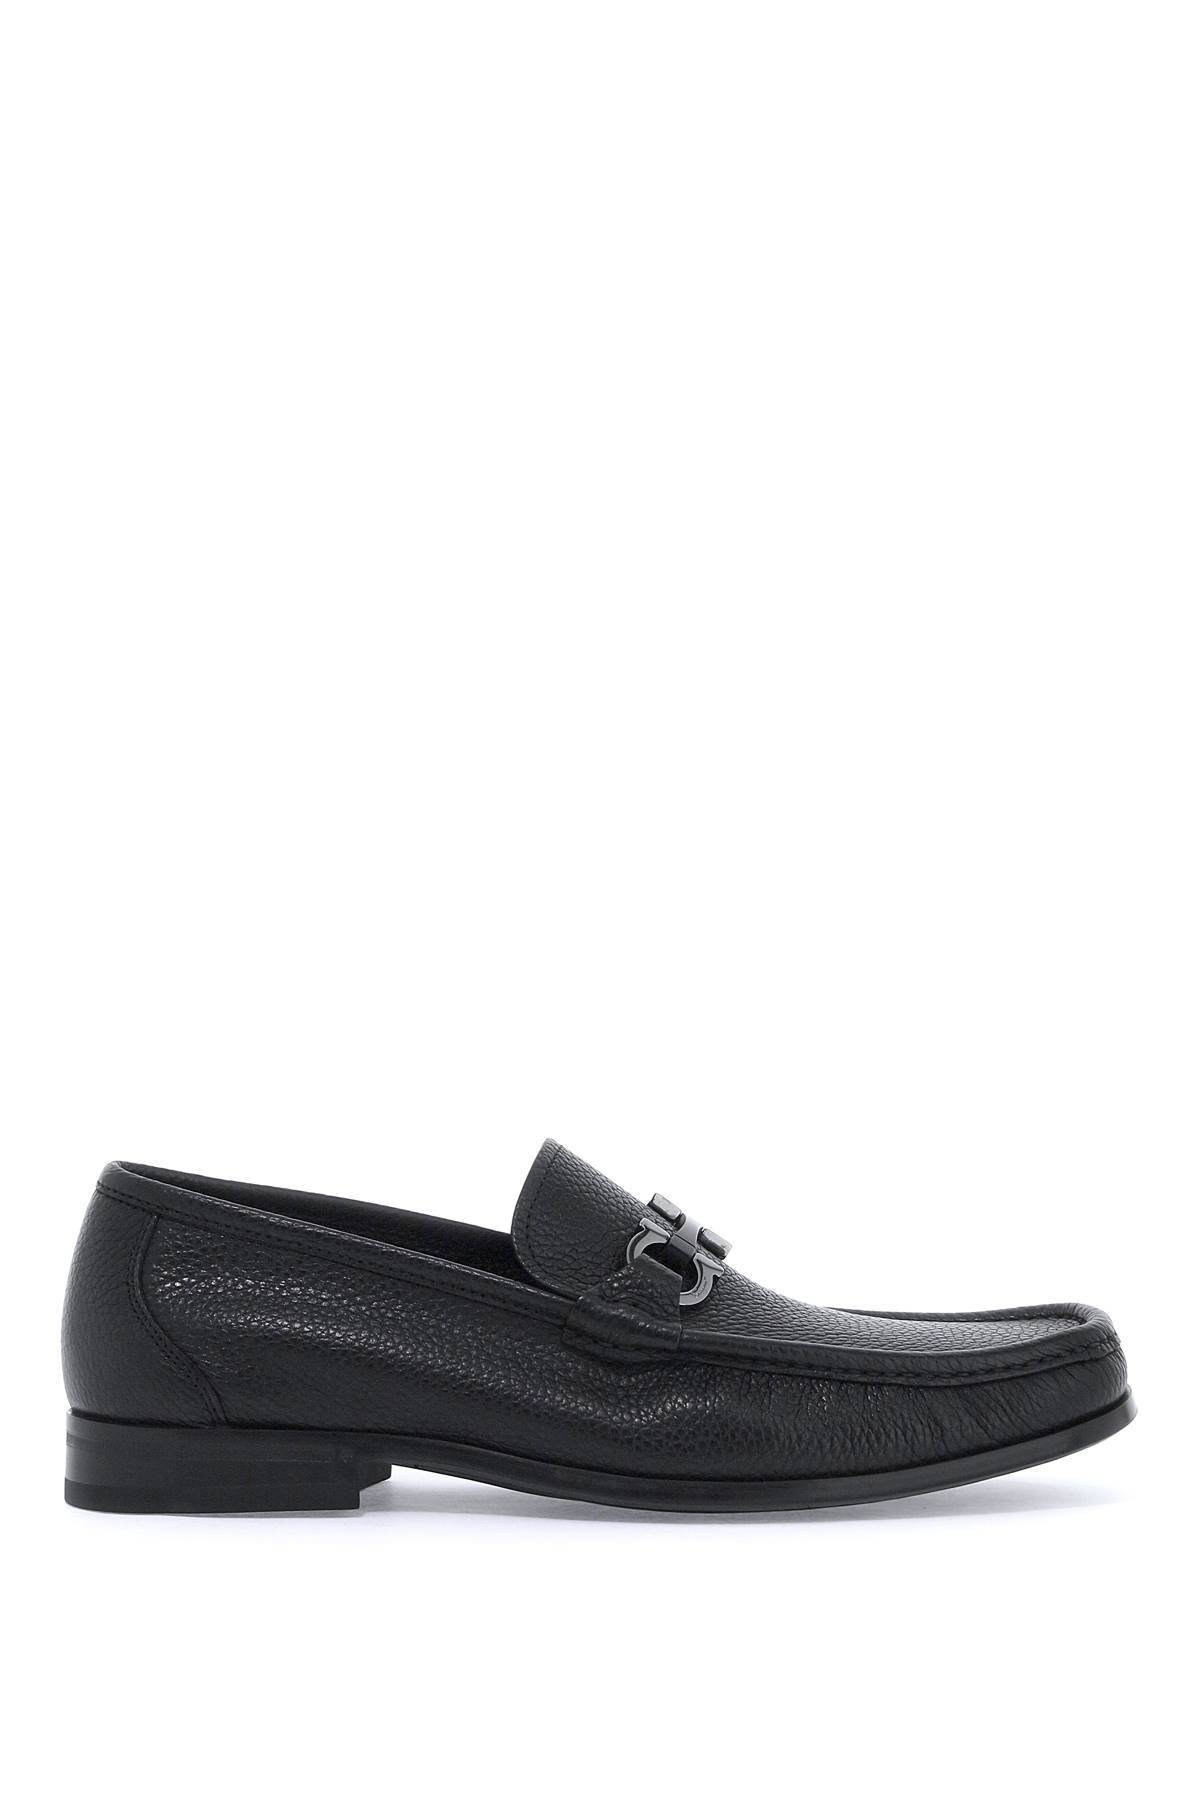 Ferragamo FERRAGAMO loafers with buckle and hooks